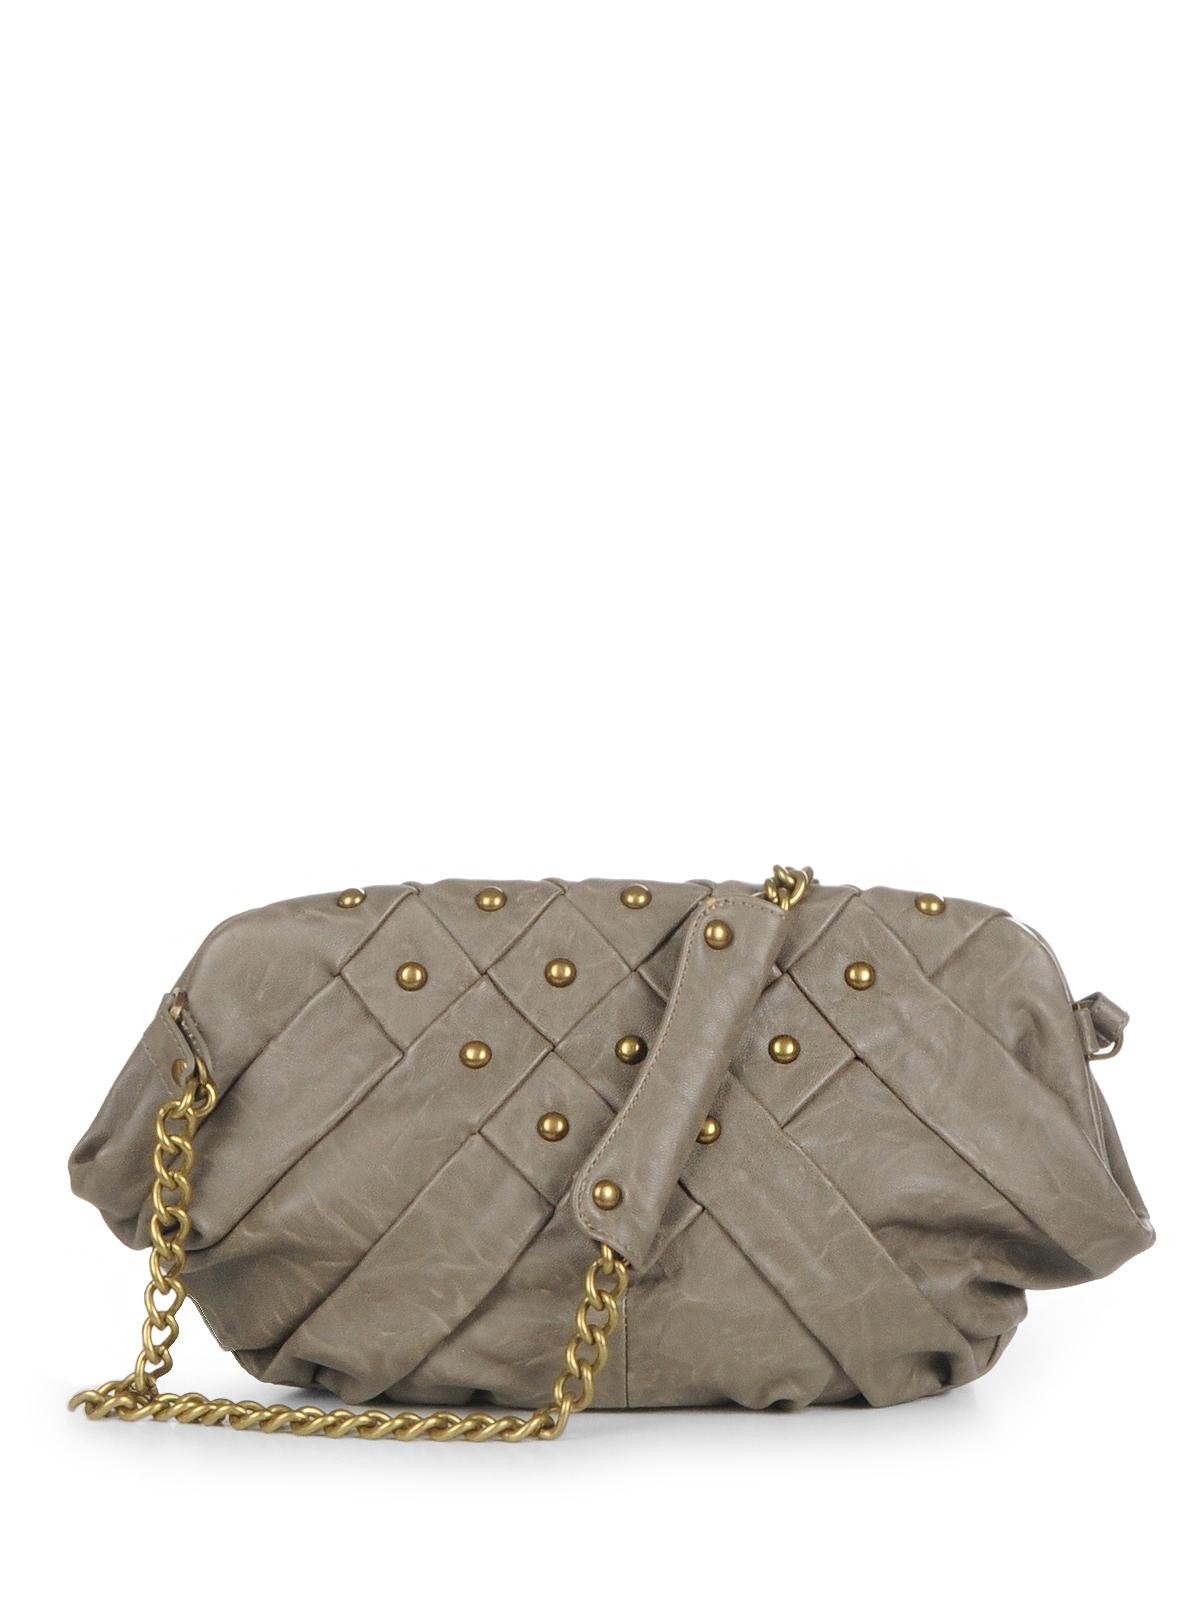 Foto Pepe Jeans Bolso gris ONE SIZE foto 586363